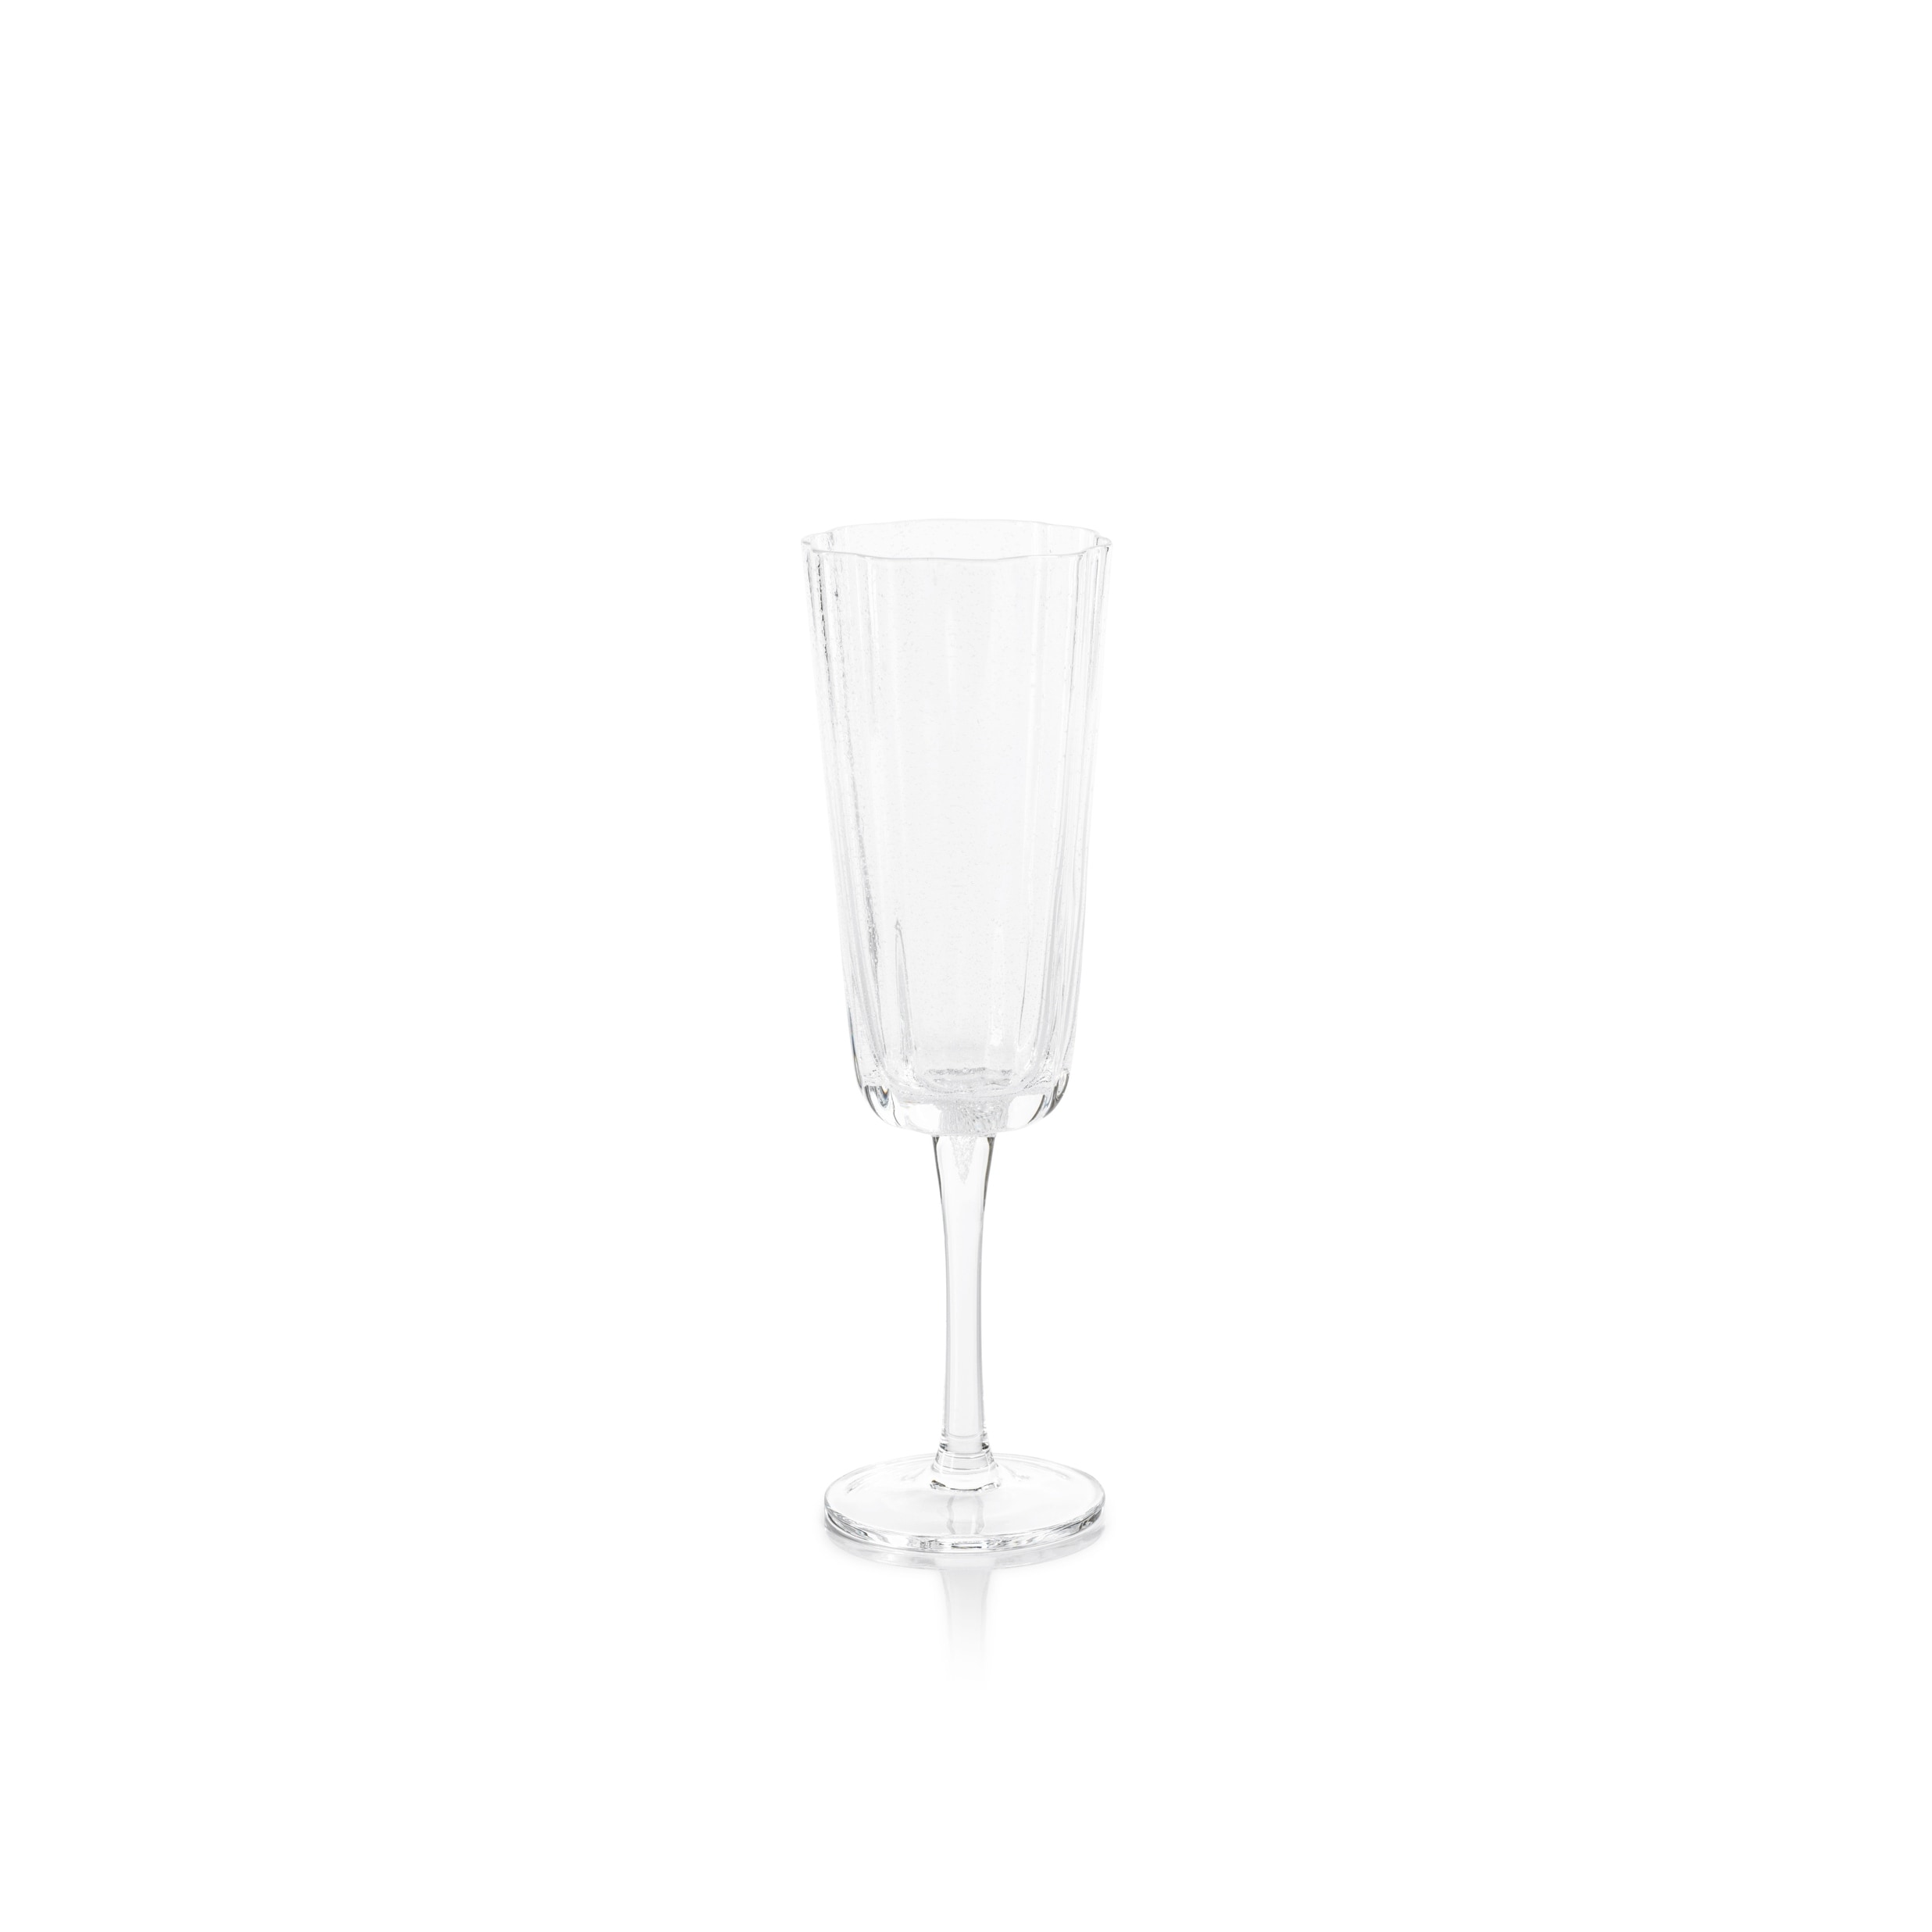 https://ak1.ostkcdn.com/images/products/is/images/direct/c31fb0567442adafc282392408188ed1bba2db75/Forli-Bubble-Champagne-Flutes%2C-Set-of-4.jpg